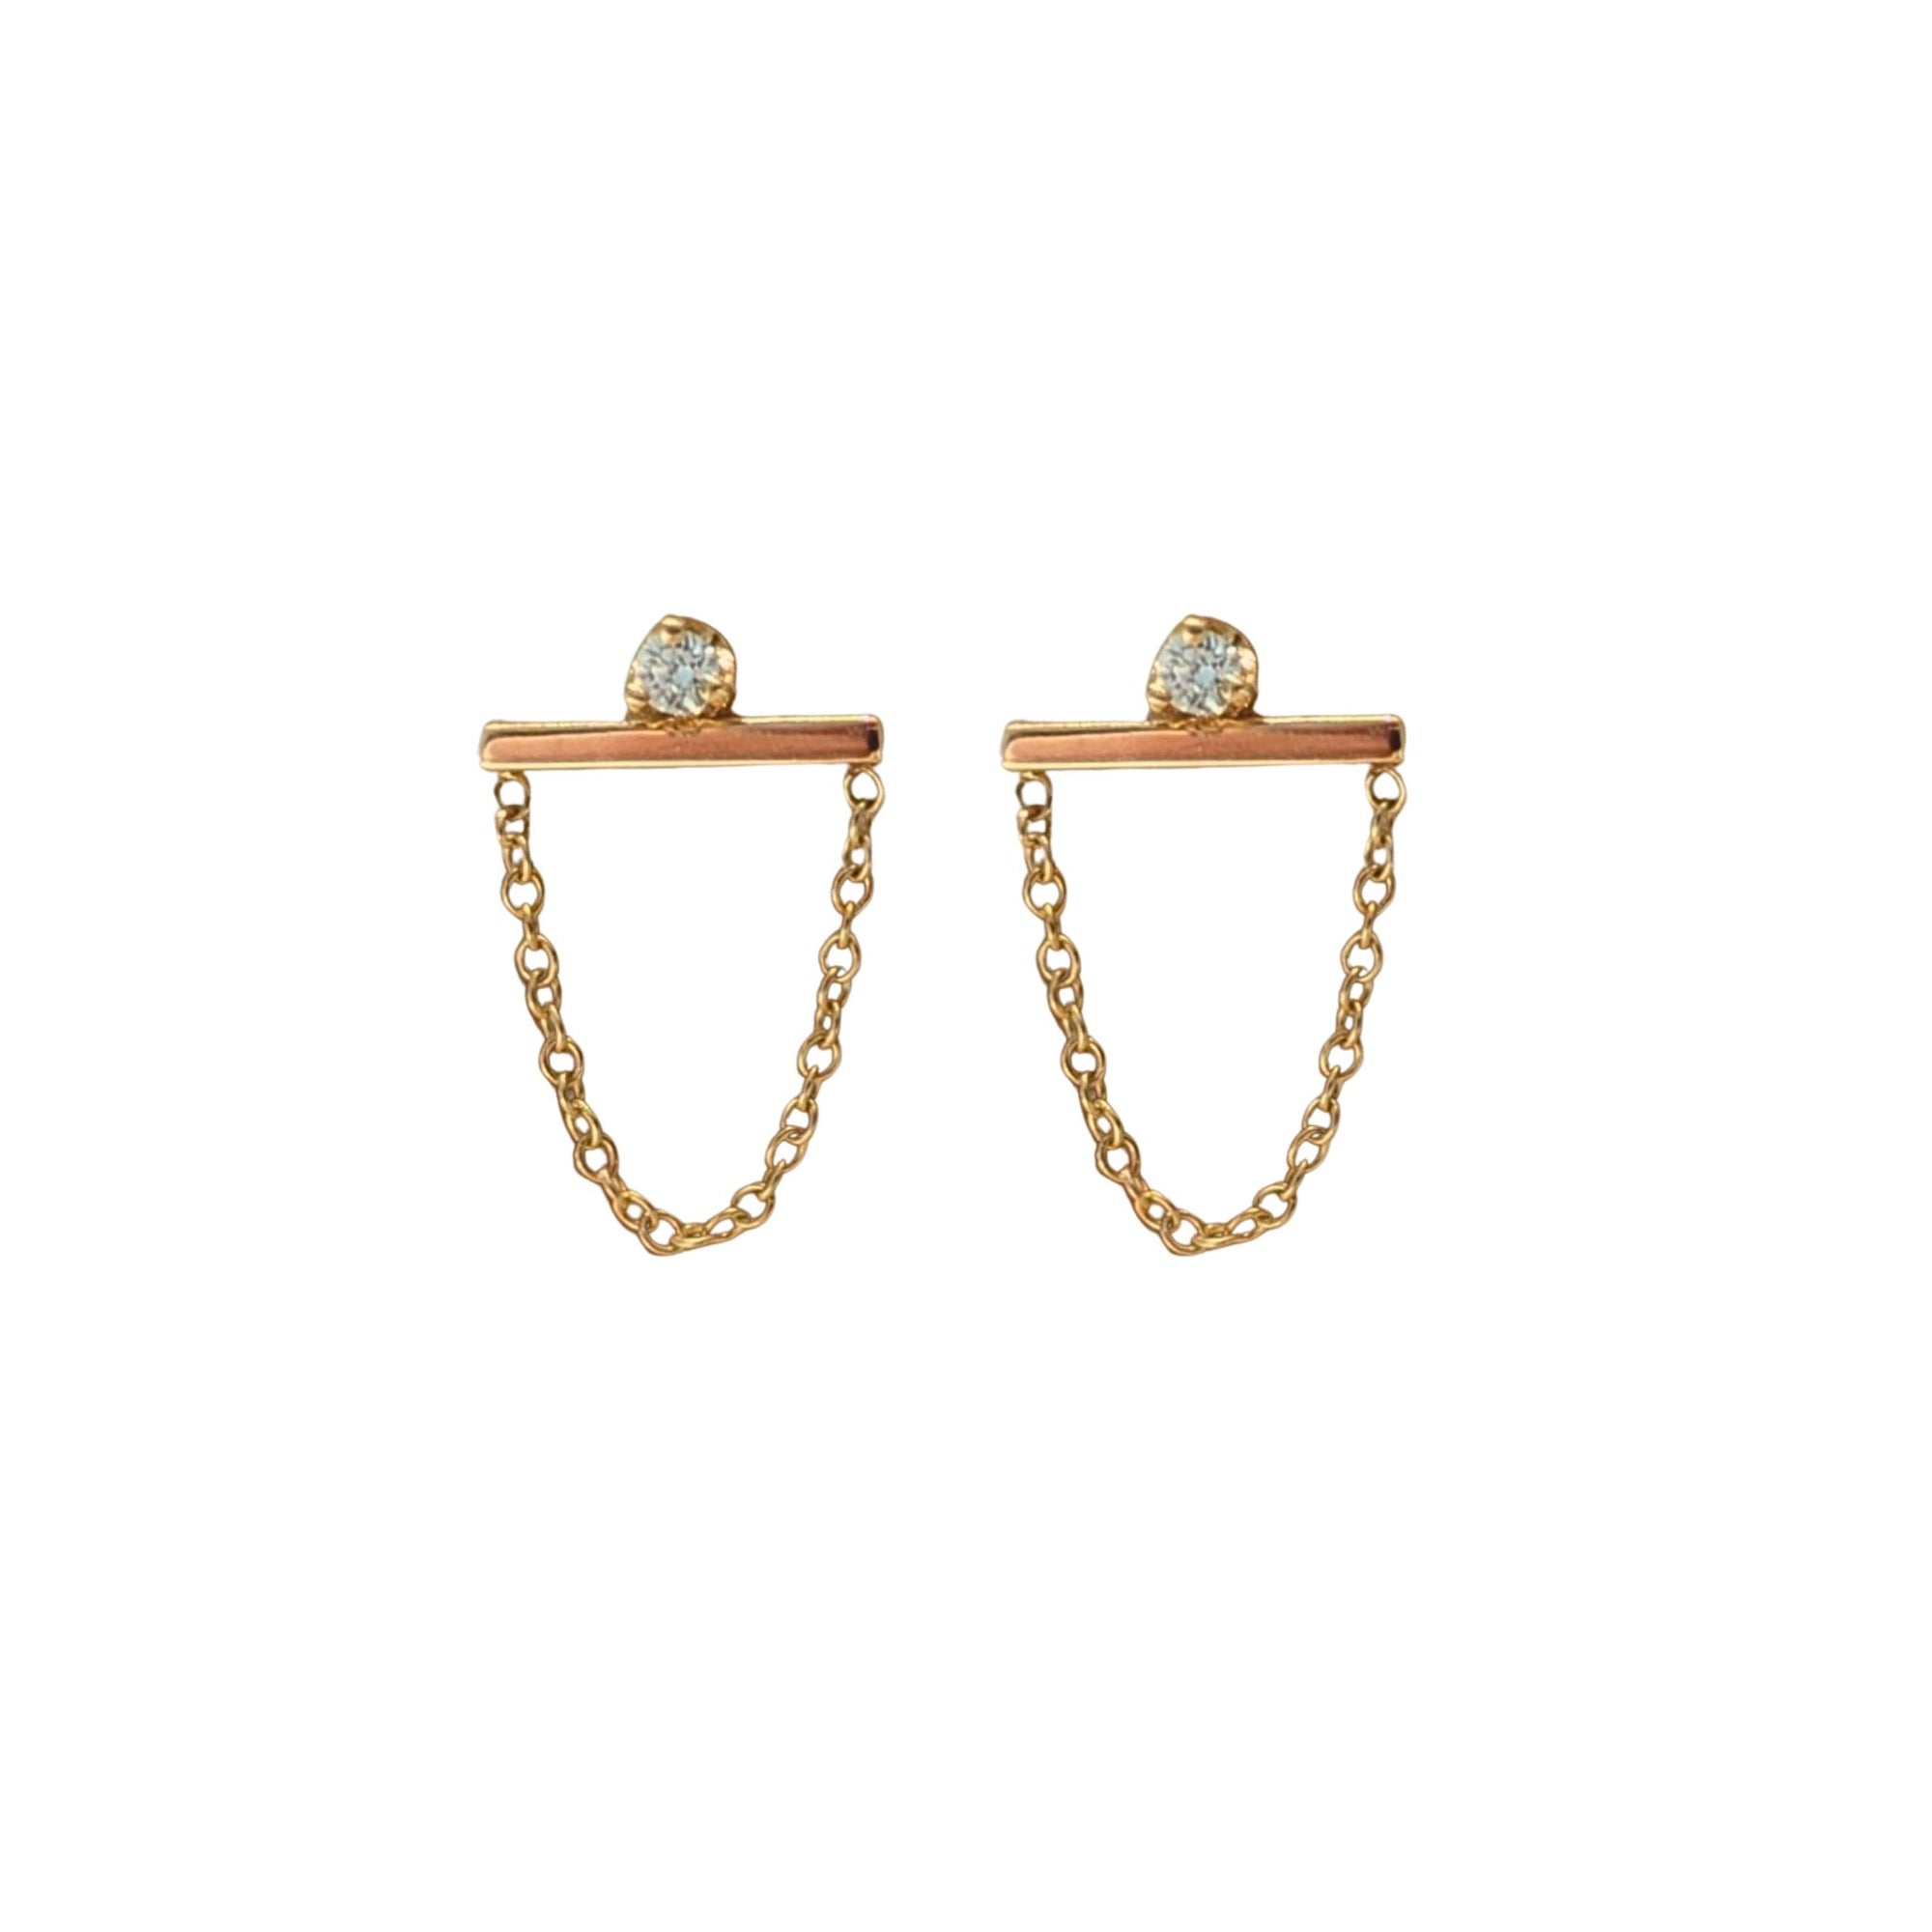 Zoe Chicco 14k Small Bar Studs with a Hanging Chain & Prong set Diamond